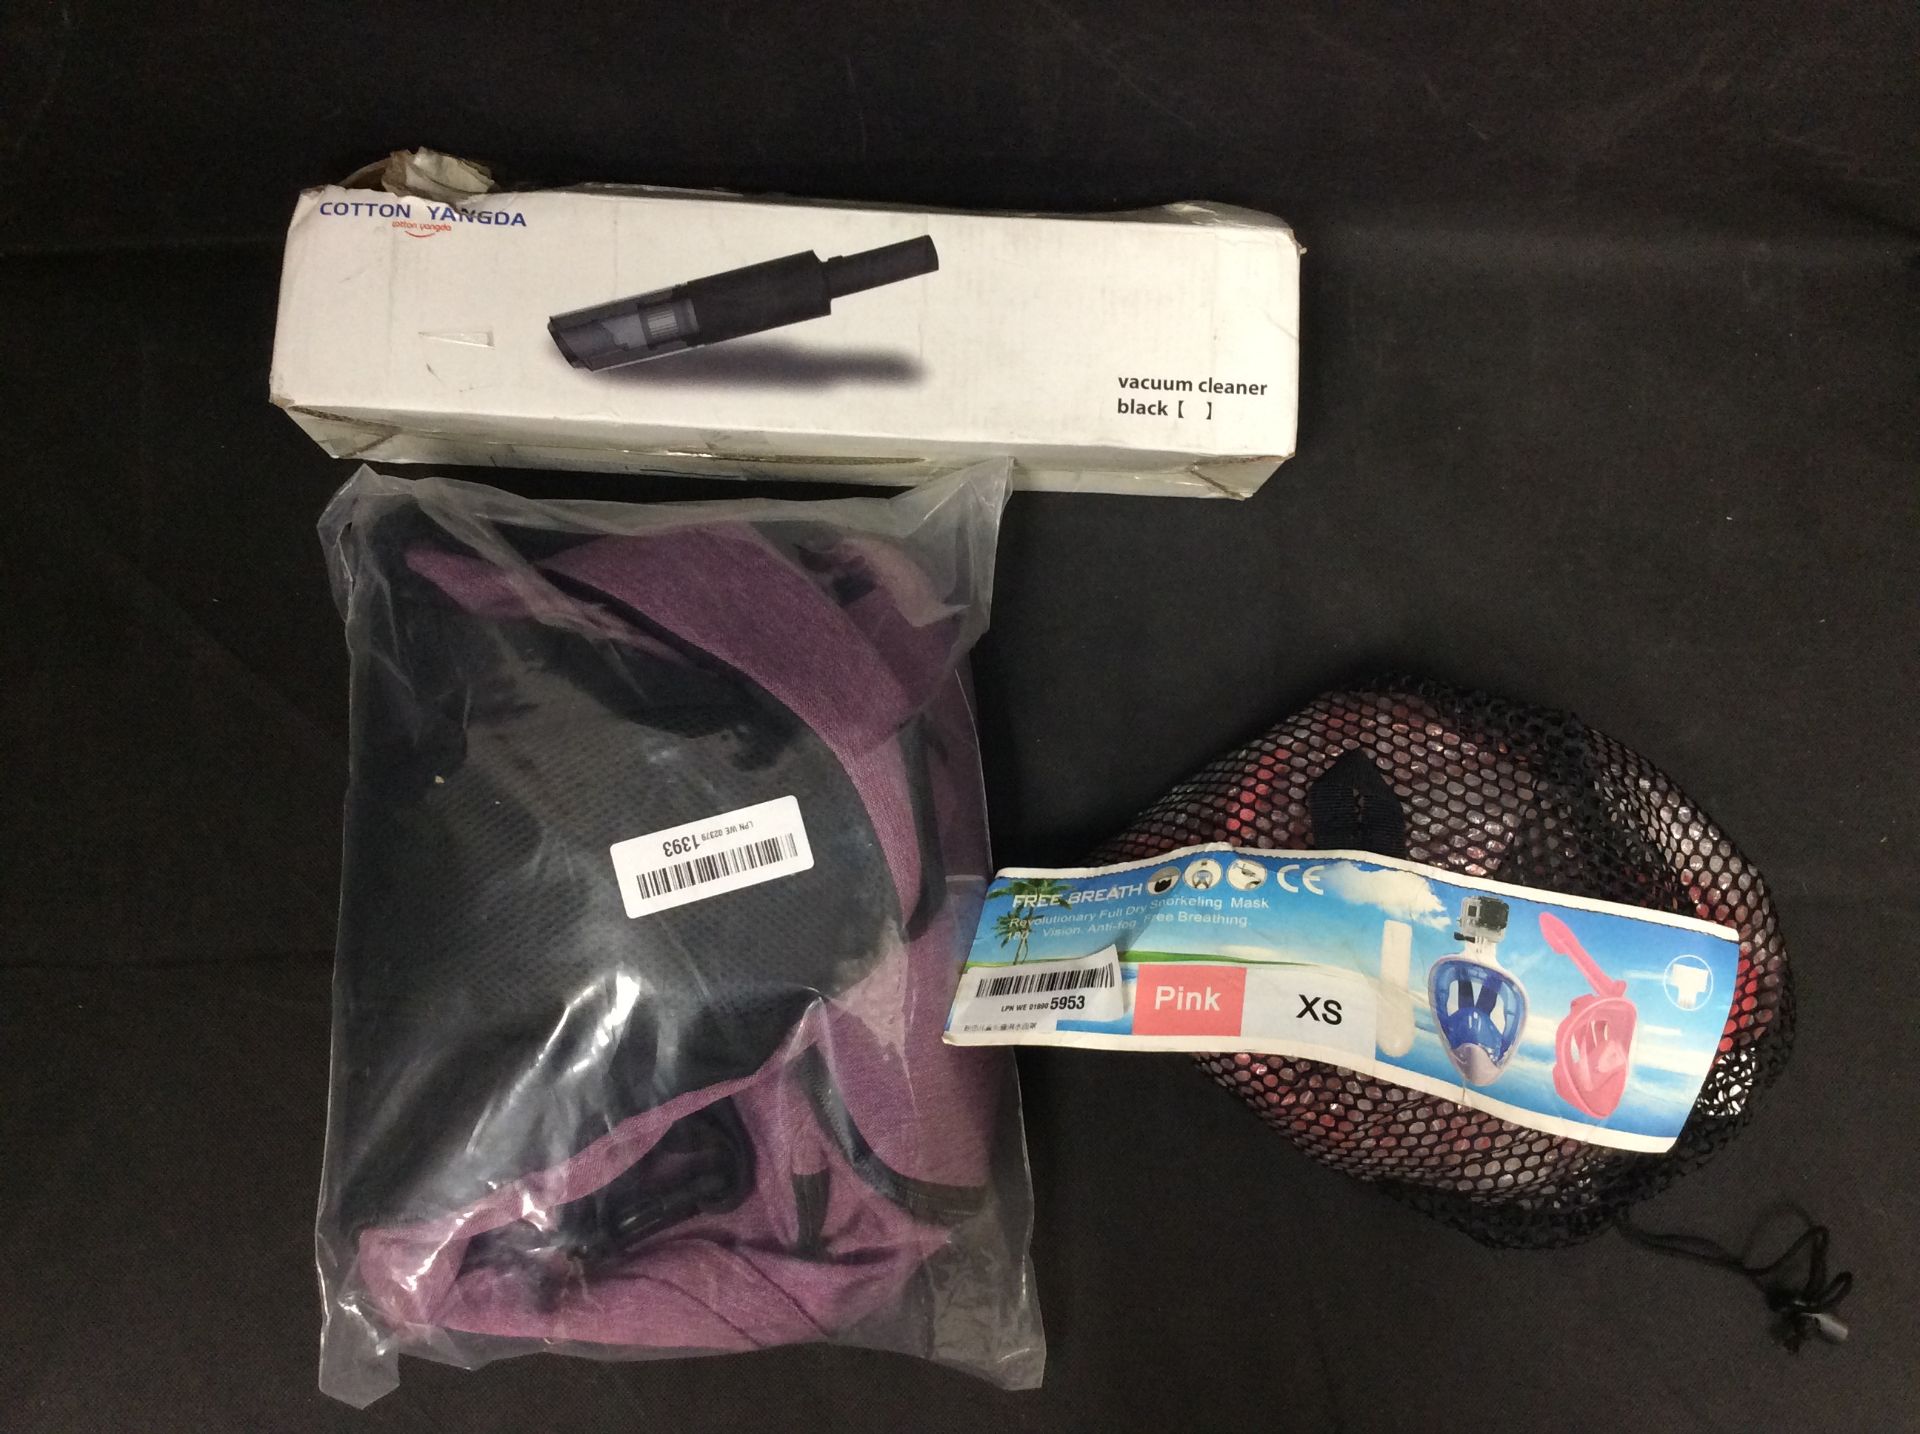 3x Mixed Items To Include Vacuum Cleaner Part, Snorkel Mask, Bagpack